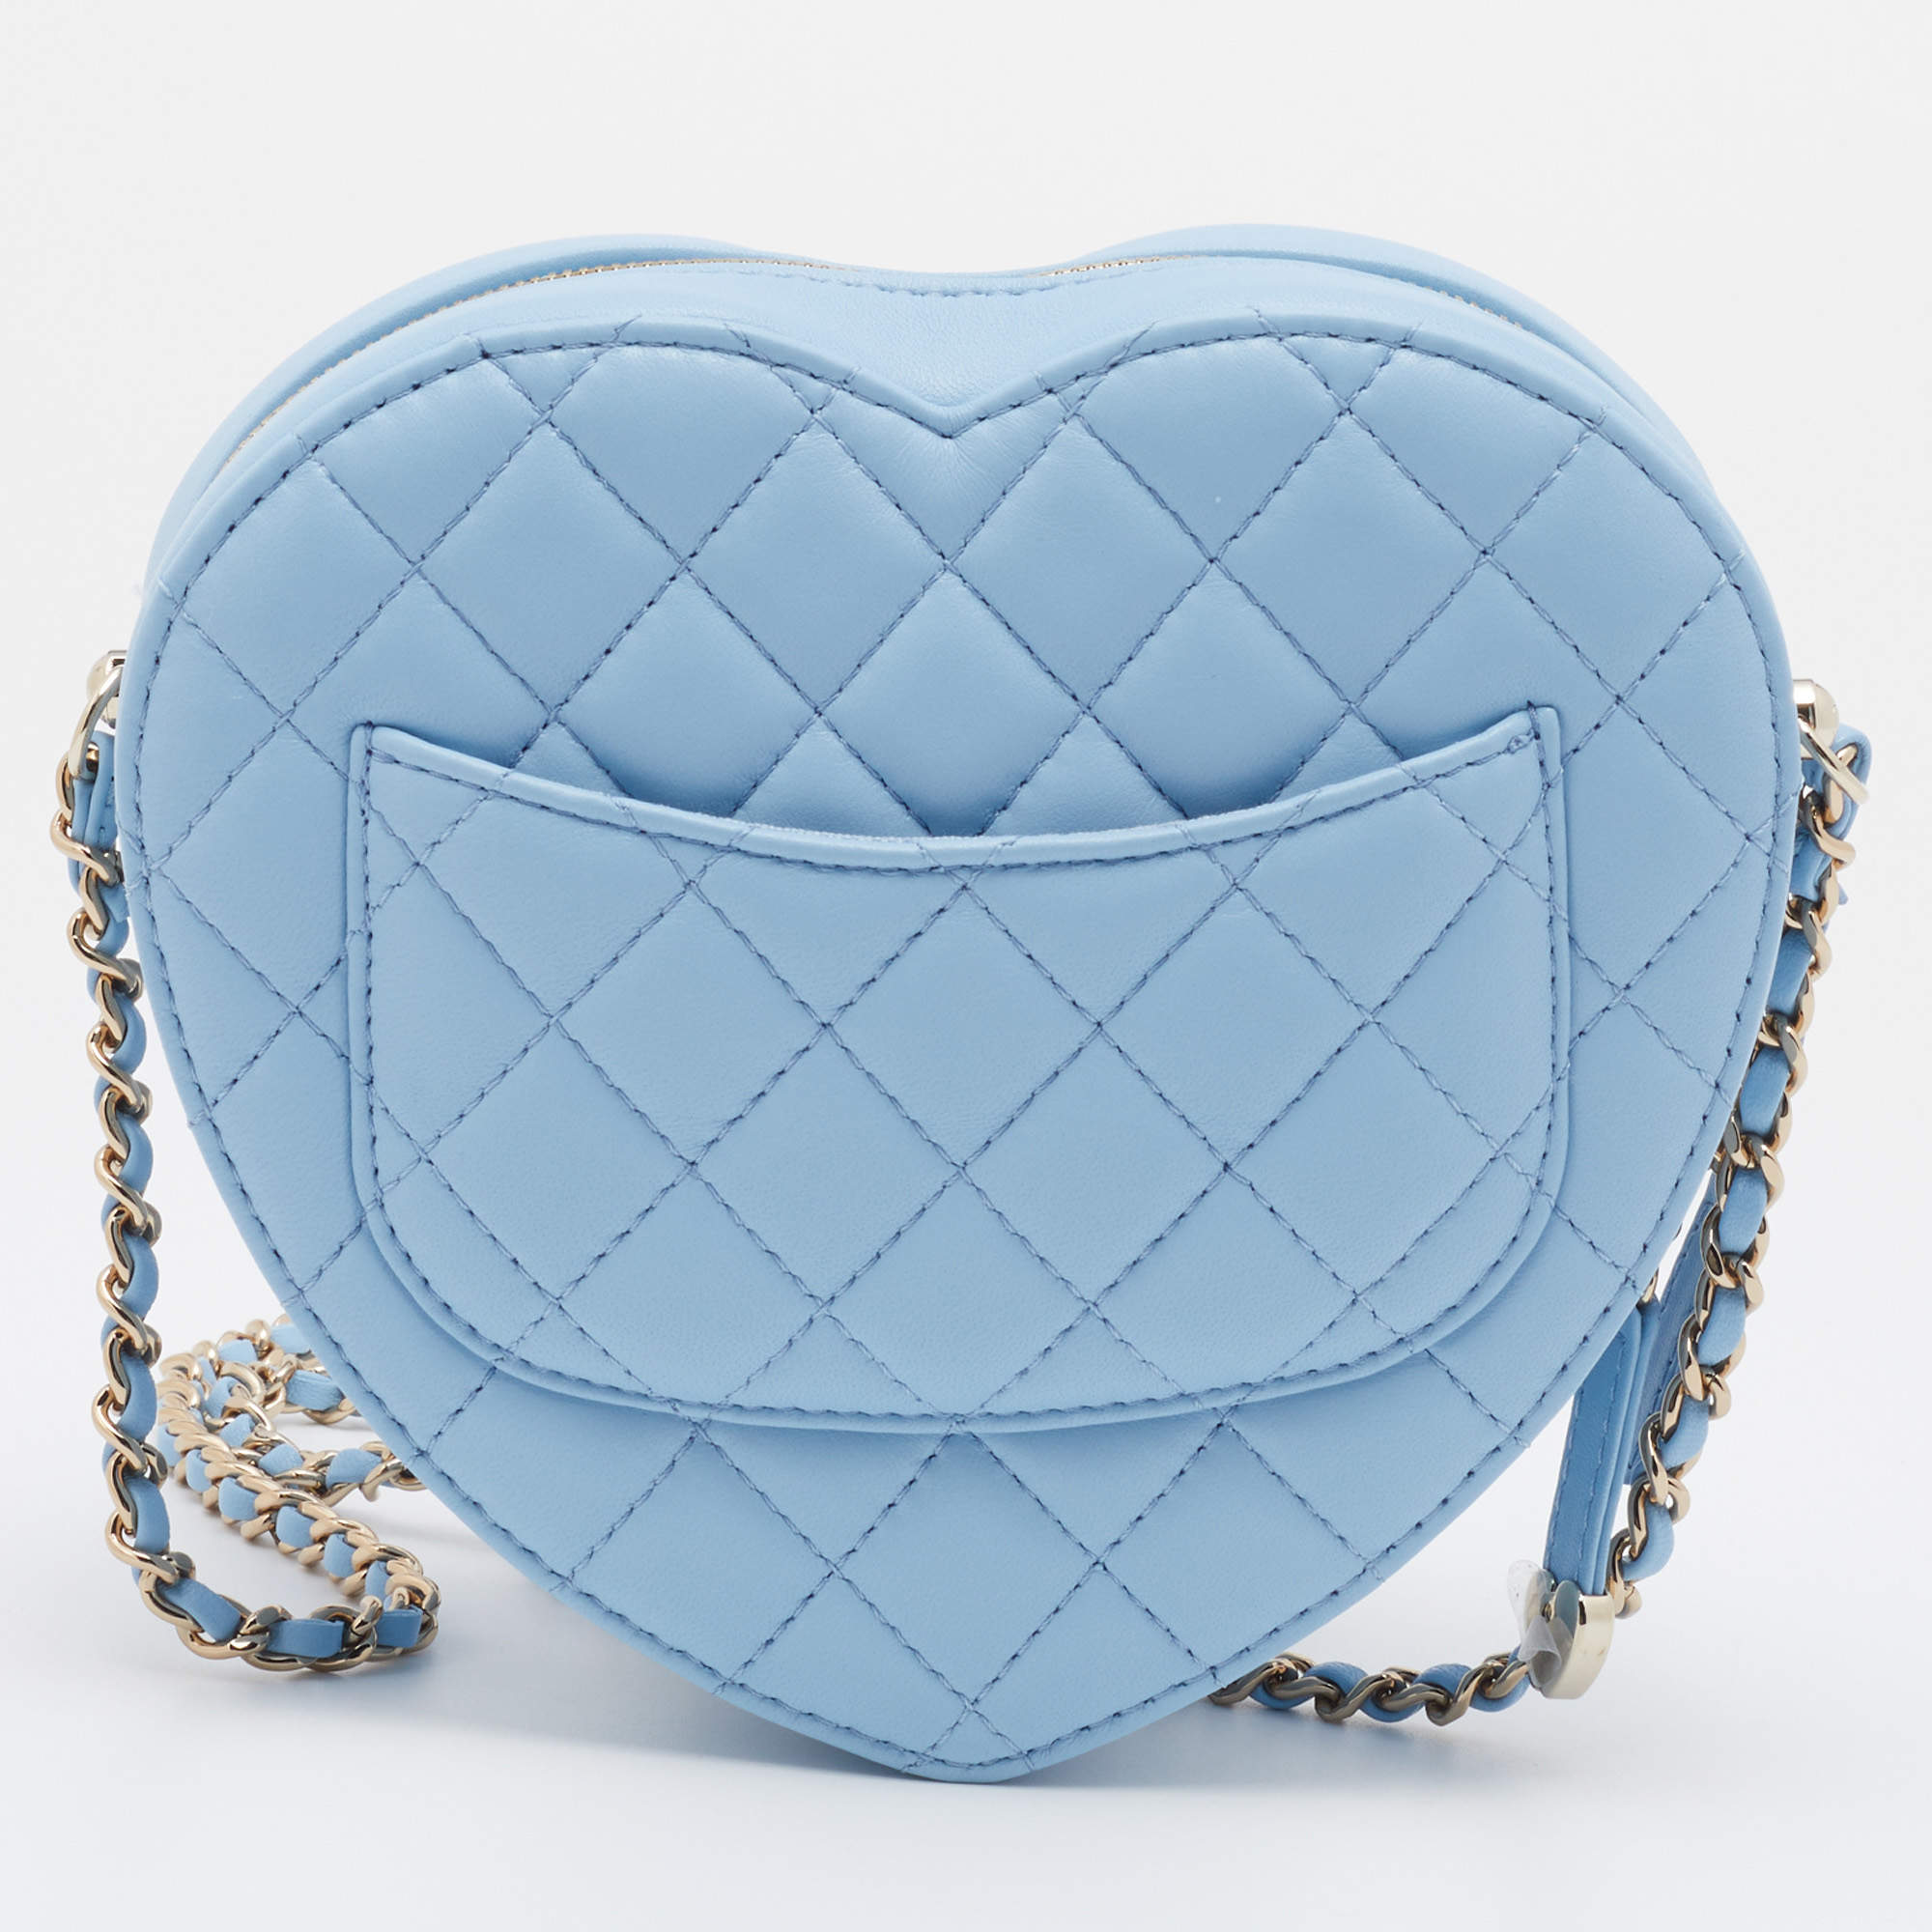 Chanel Turquoise Leather Heart Bag. This heart shaped bag is a